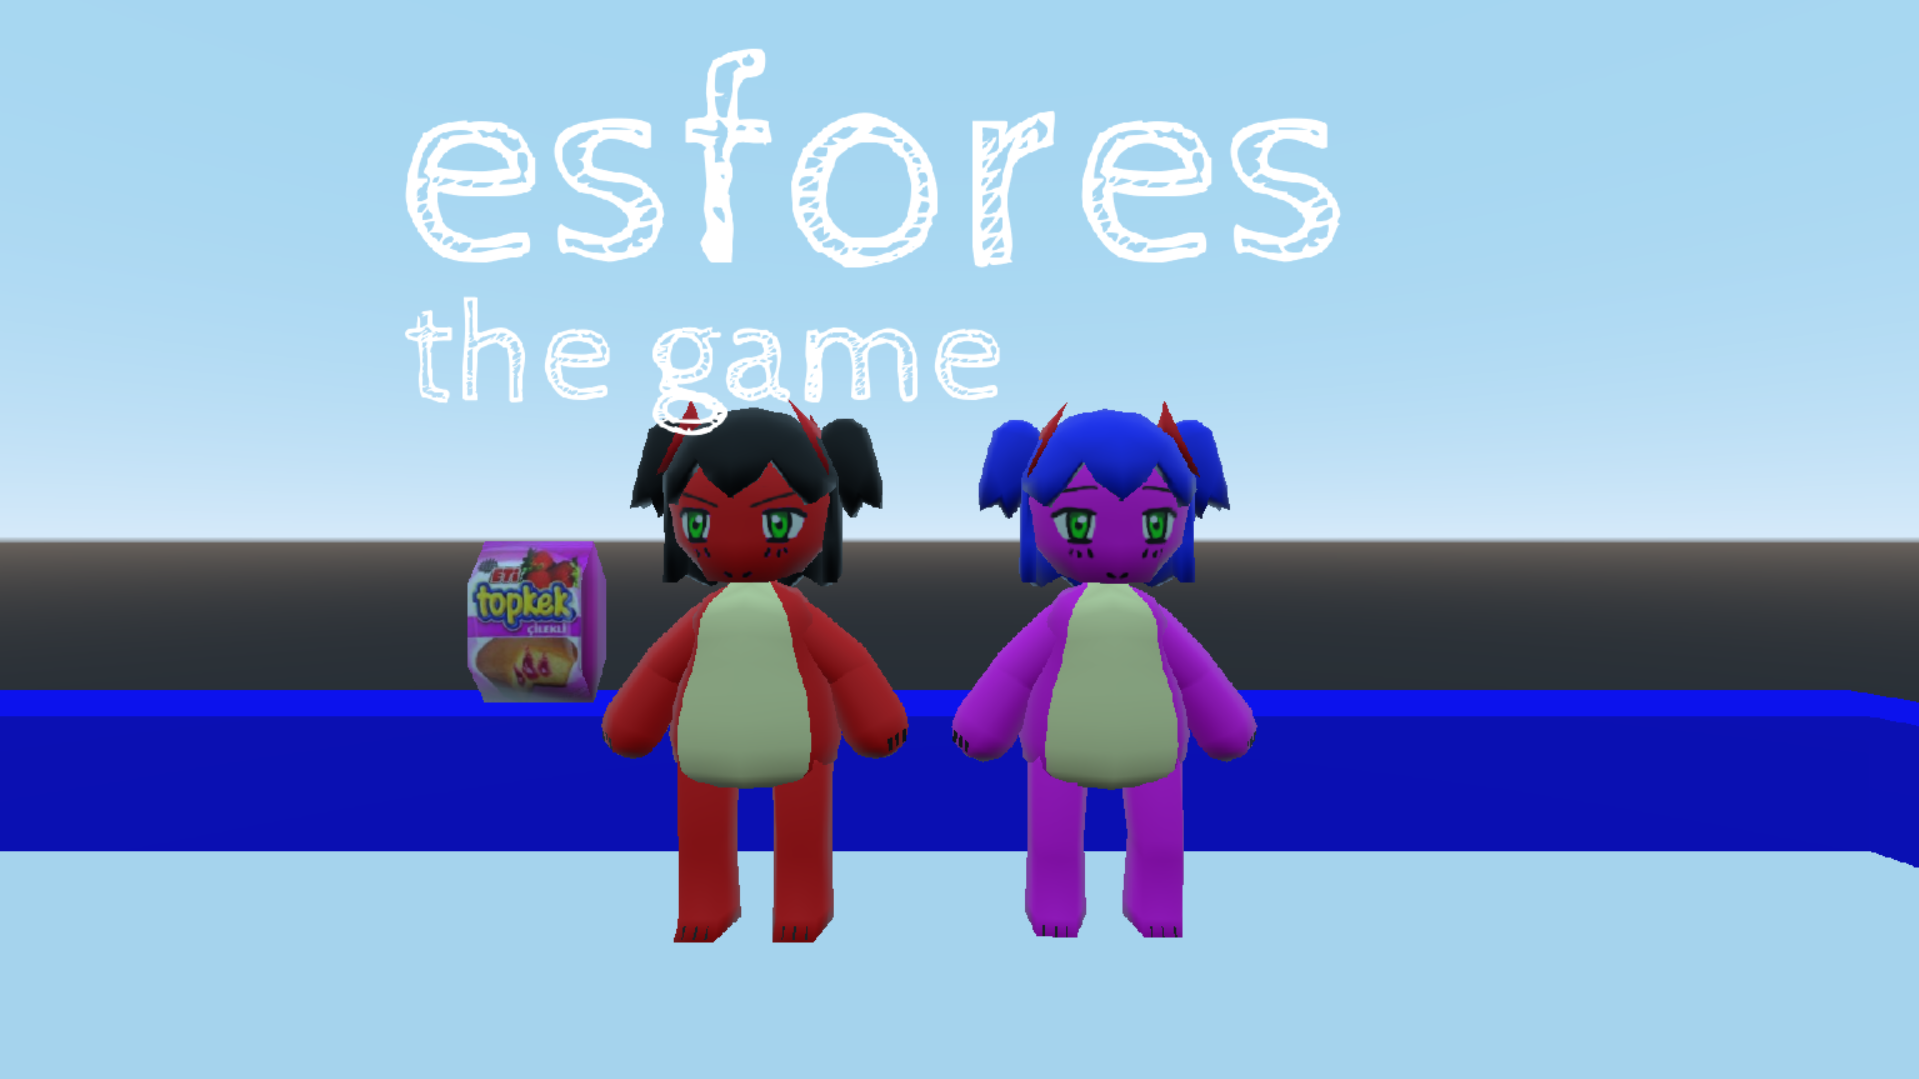 esfores: the game